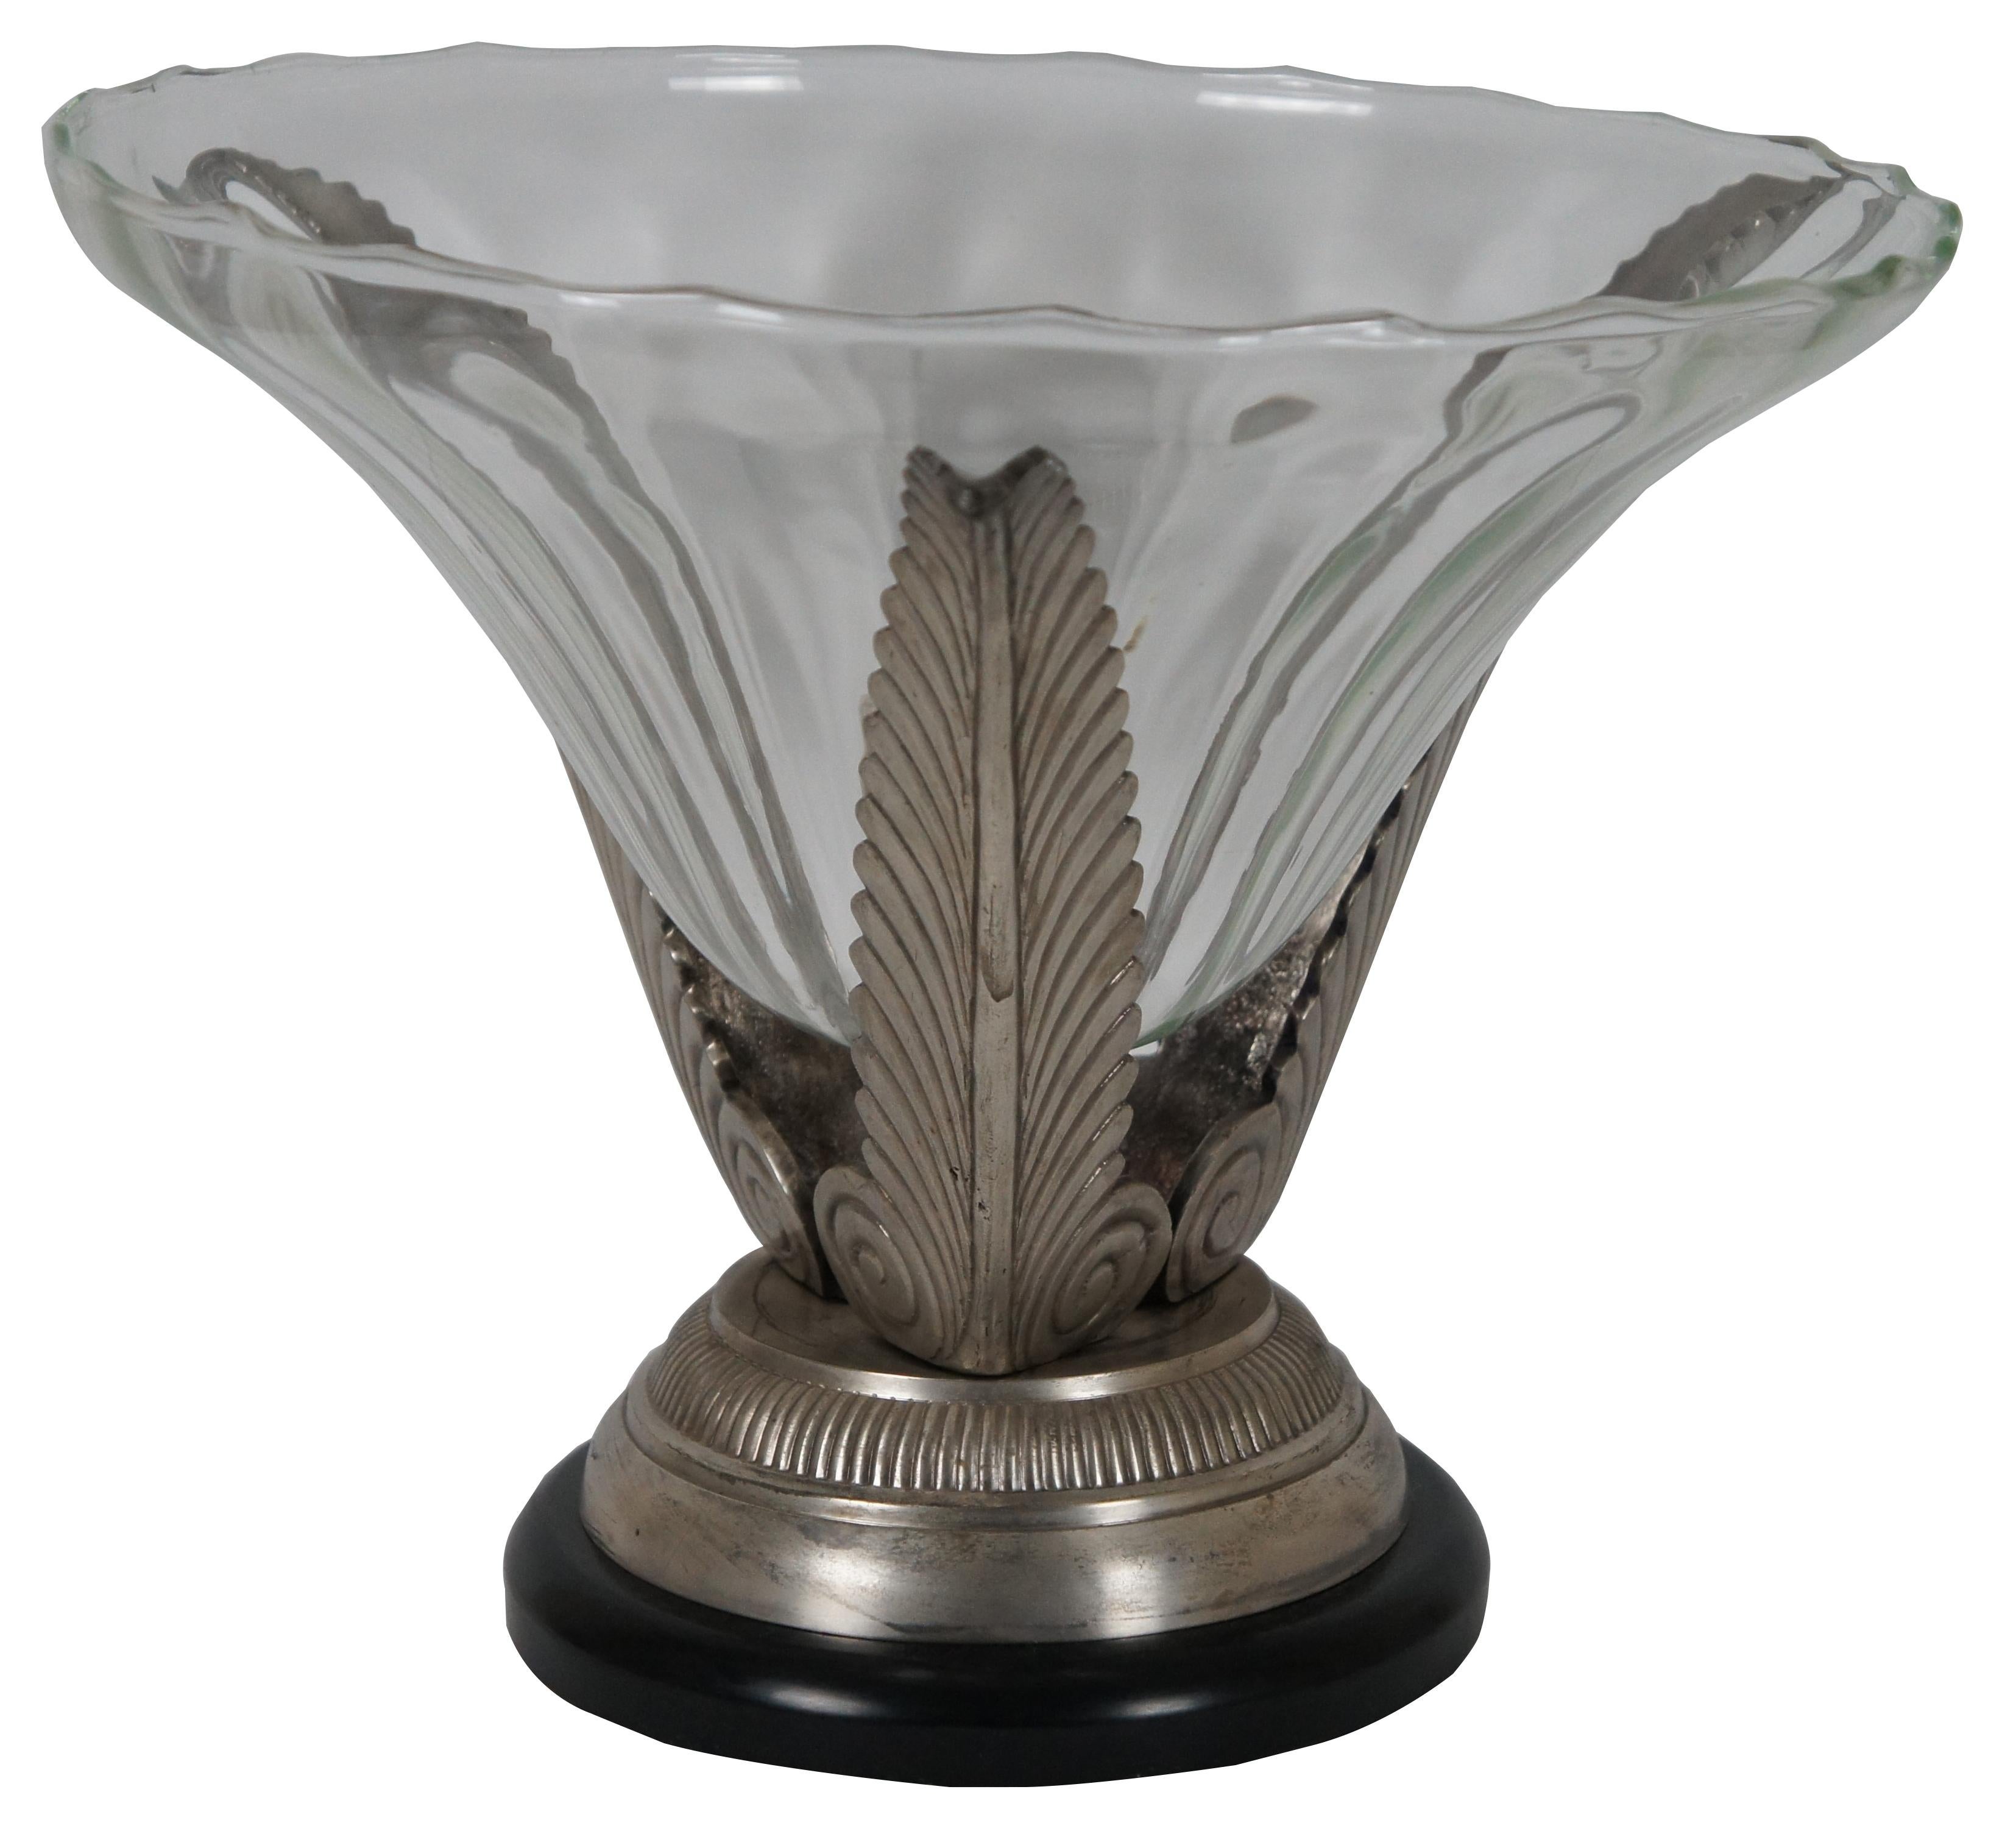 Hand crafted glass centerpiece bowl gently rippling texture, standing on a trio of silver painted metal acanthus leaves on a silver and black pedestal base.